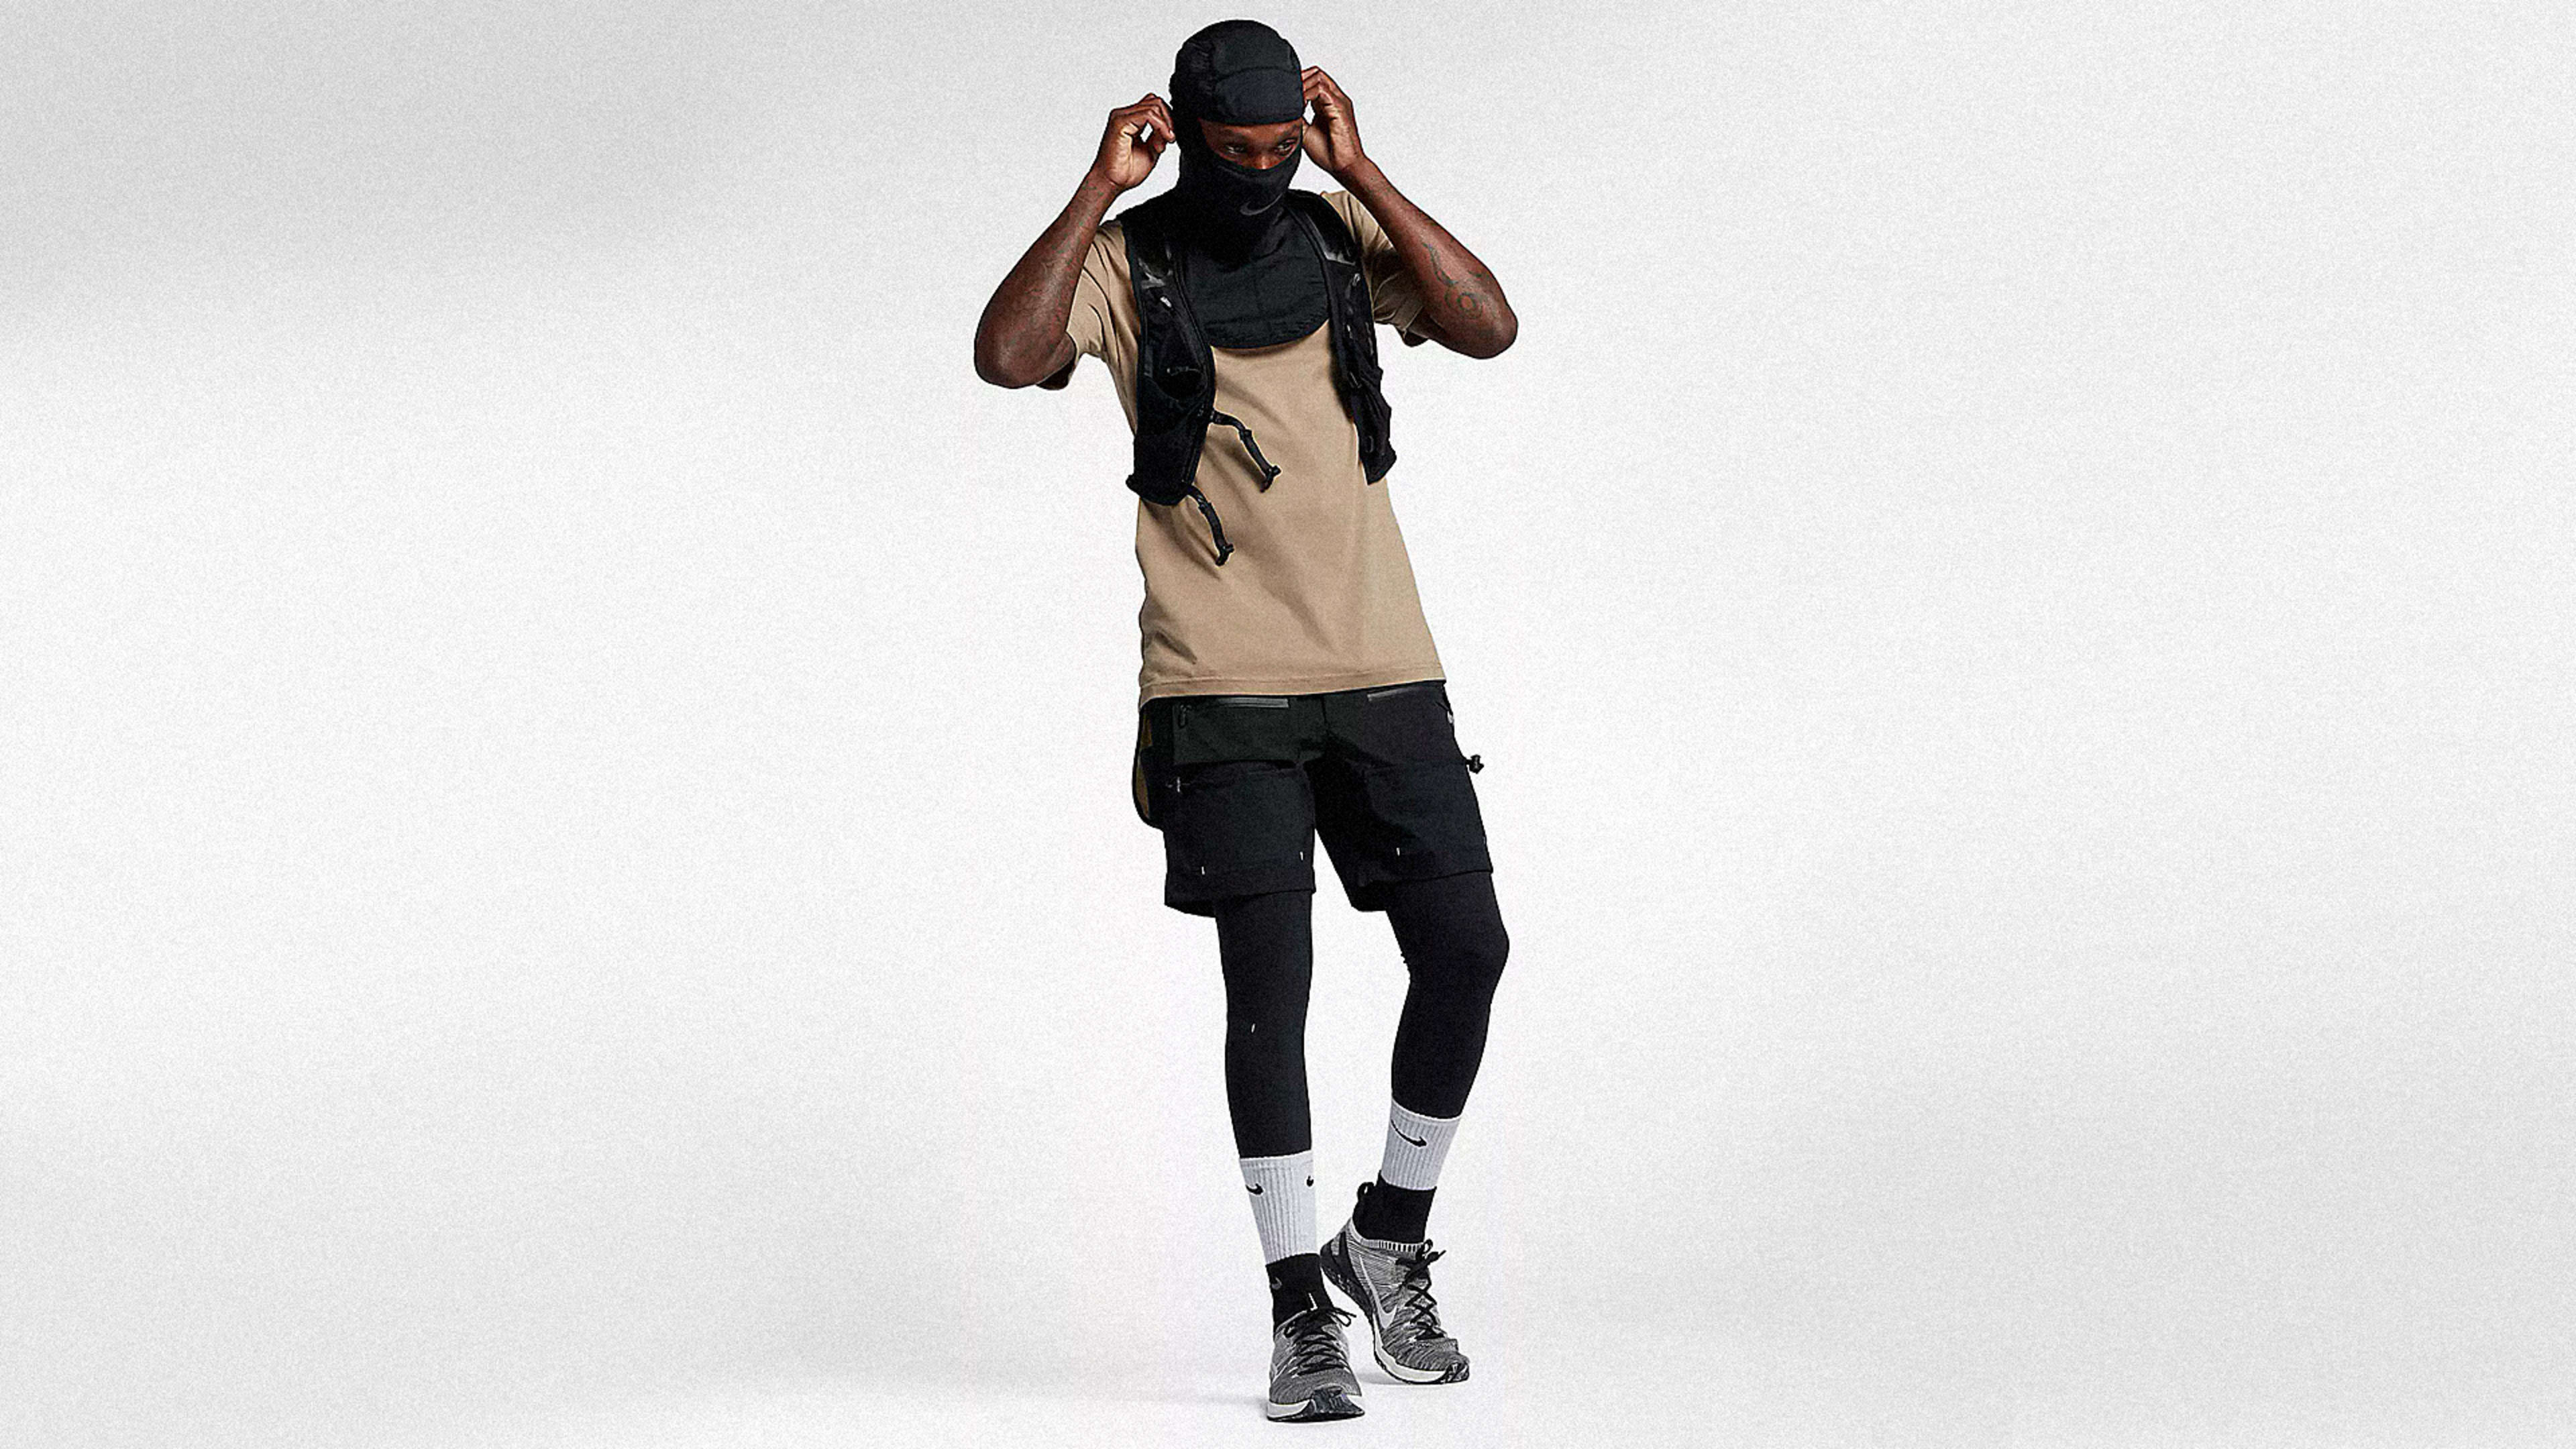 Nike pulls balaclava after accusations of promoting gang violence